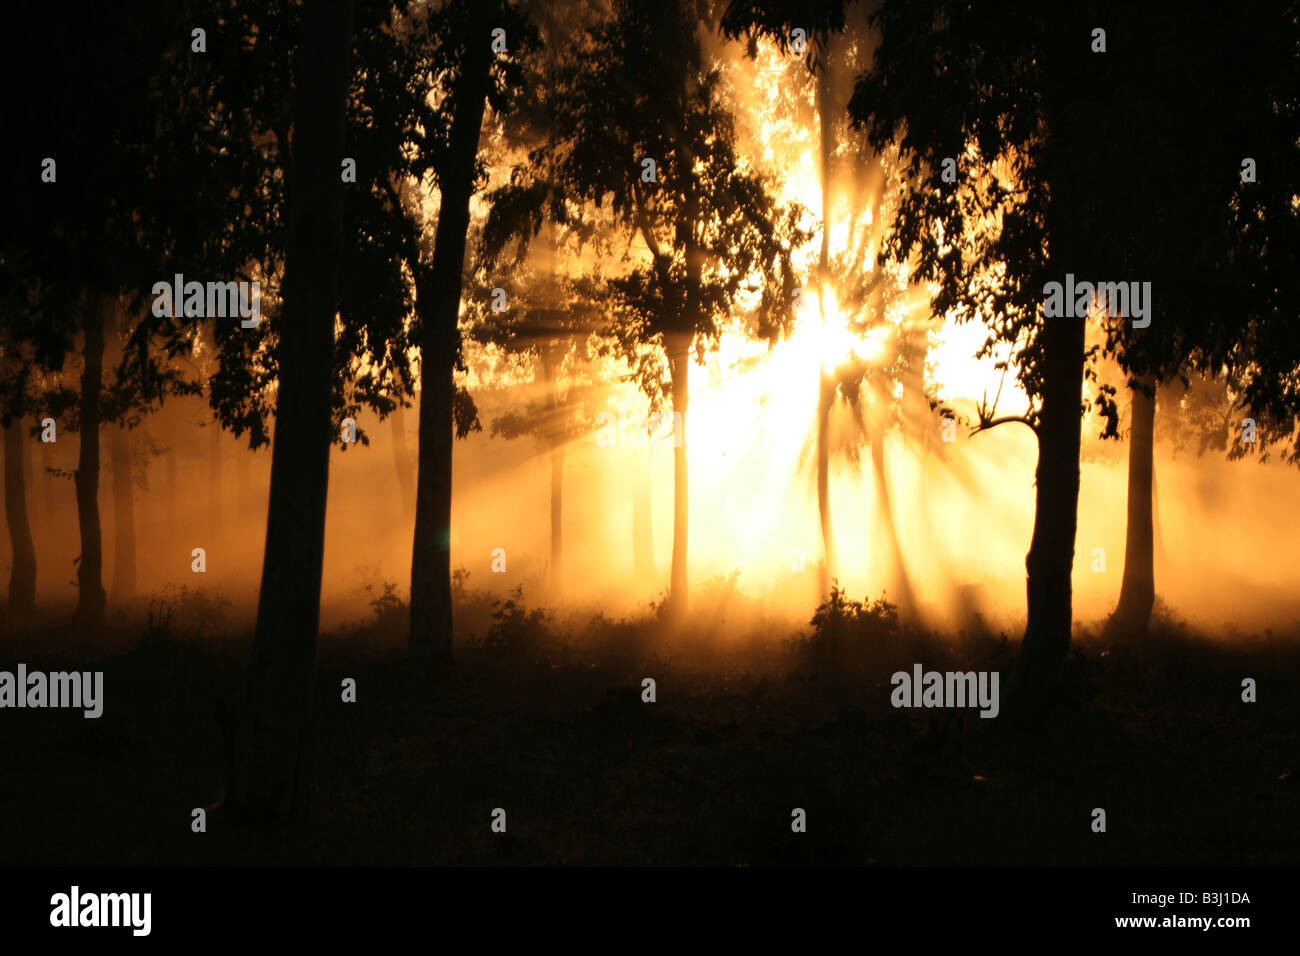 blazing forest dramatic scene in a forest at sunset Stock Photo